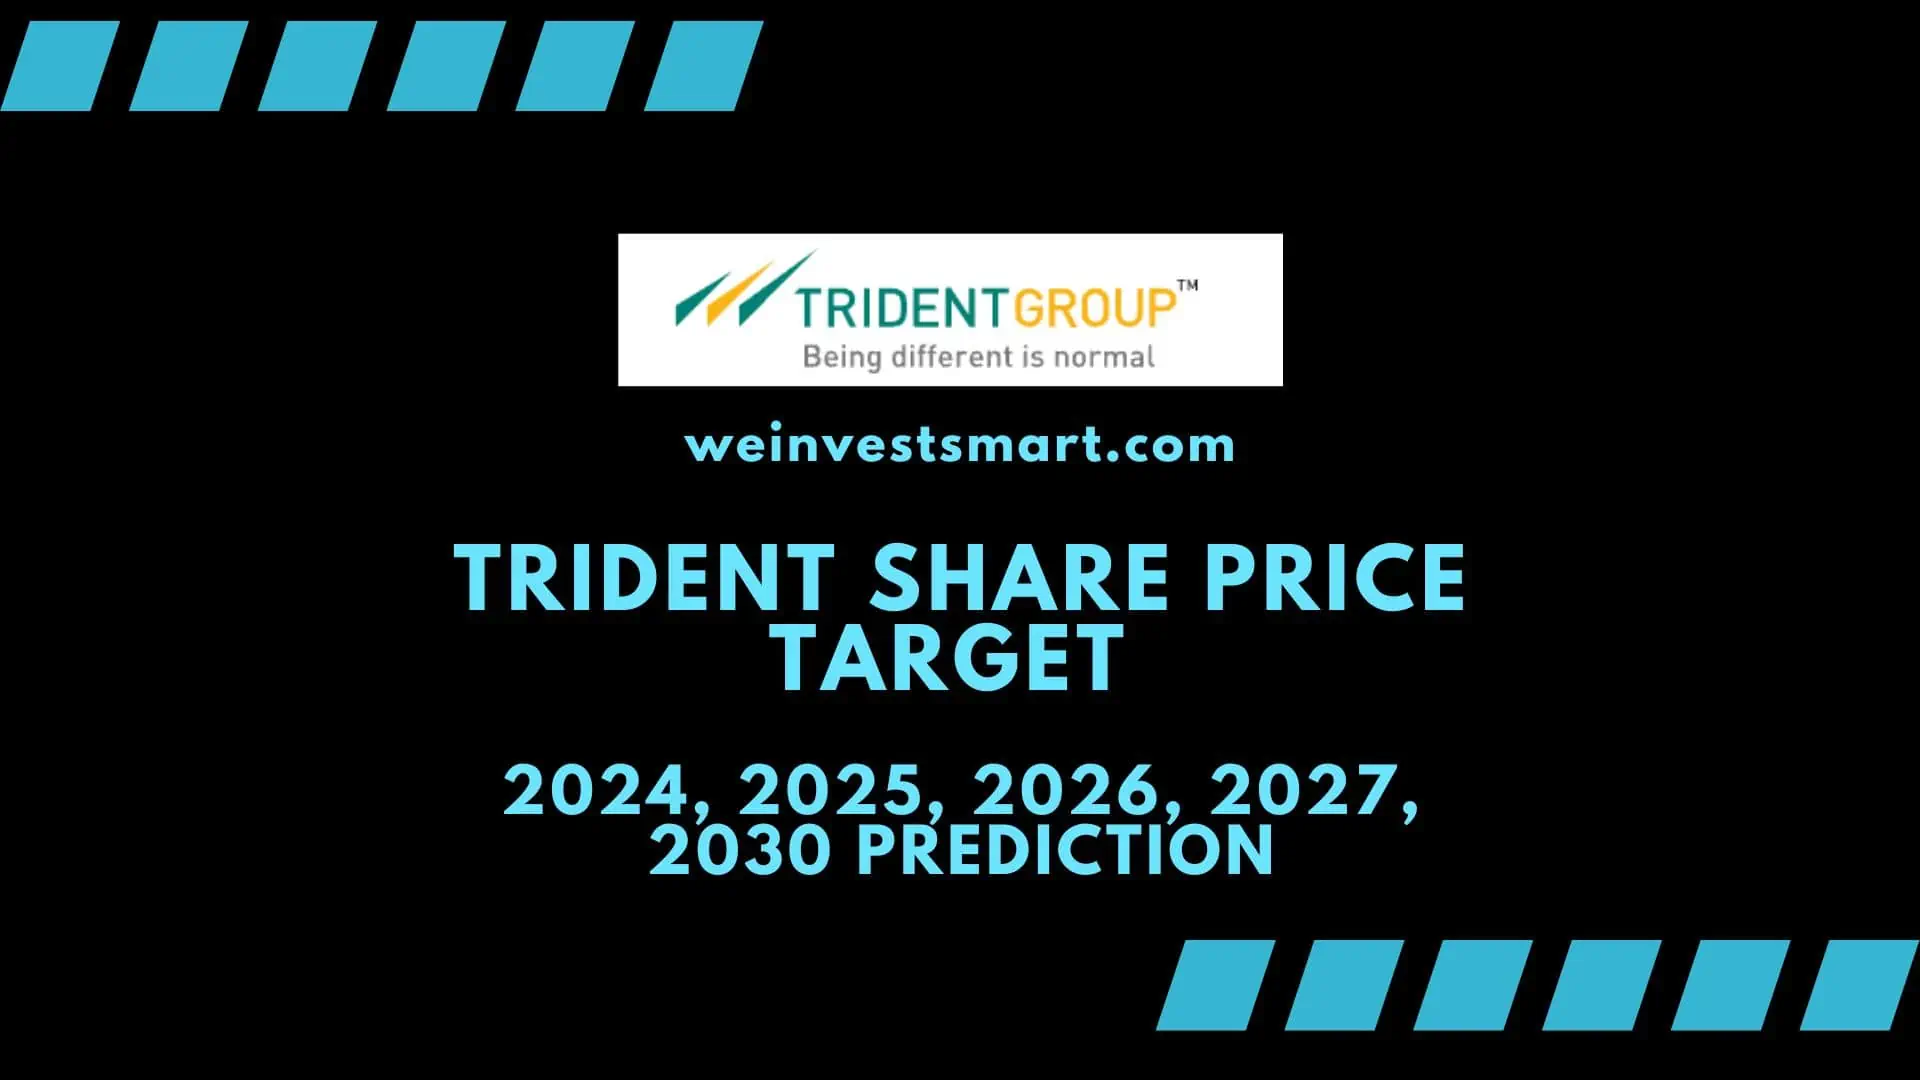 Trident share price target 2024, 2025, 2026, 2027, 2030 prediction